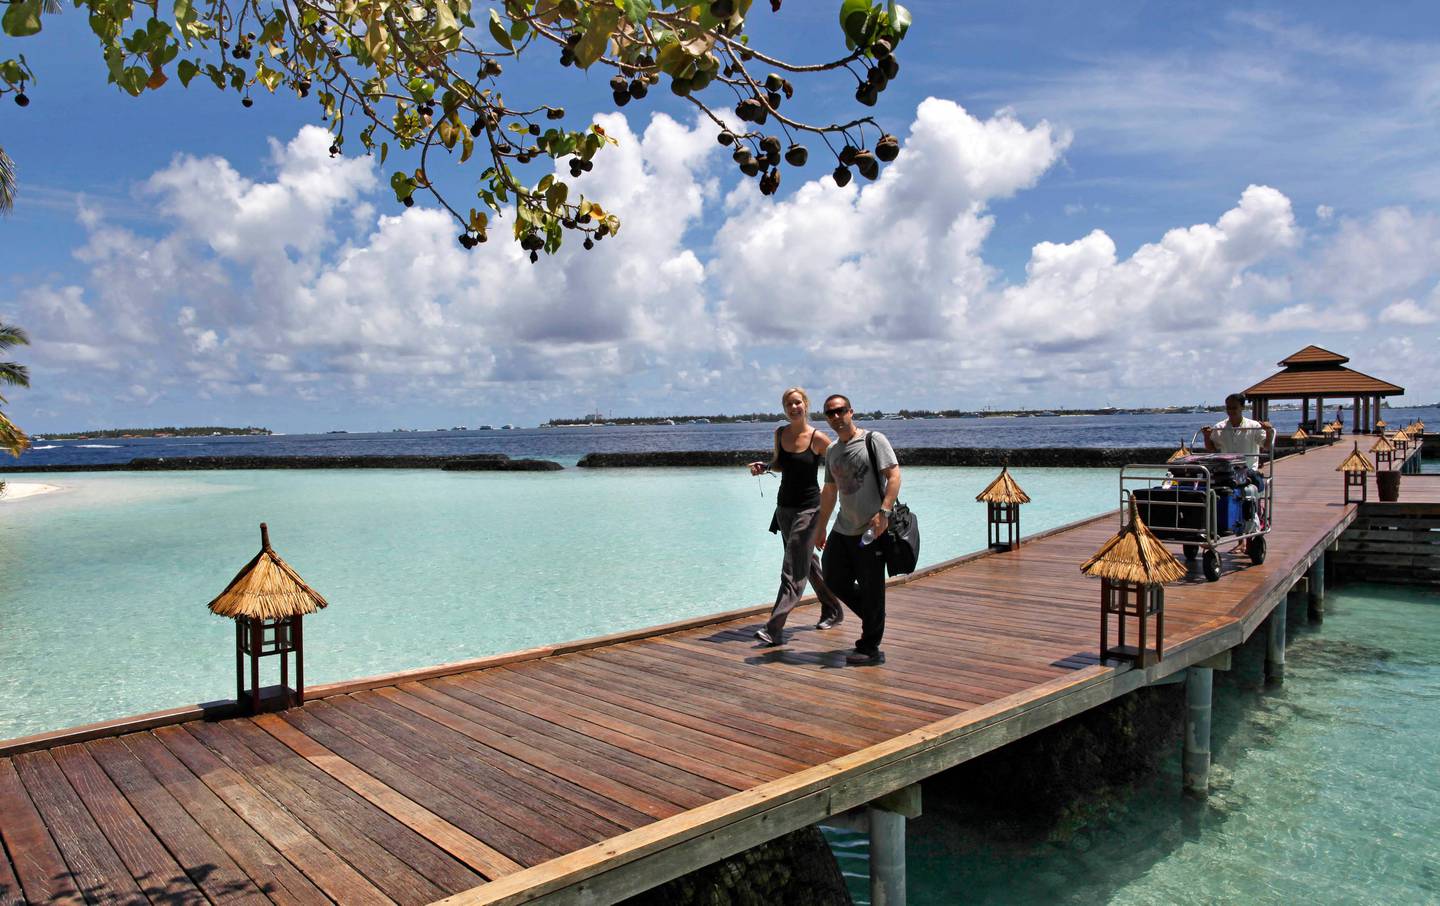 Foreign tourists arrive in a resort in the Kurumba island in Maldives, Sunday, Feb. 12, 2012. The Maldives' new president expanded his Cabinet on Sunday to include religious conservatives who have been demanding the introduction of strict Islamic laws in the Indian Ocean nation that relies on high-end tourism. Tourism is the main industry in the Maldives, a chain of nearly 1,200 islands off southern India blessed with sandy beaches and coral. Most resorts remained mostly untouched by the protests in Male and the southernmost atoll, Addu. (AP Photo/ Gemunu Amarasinghe)